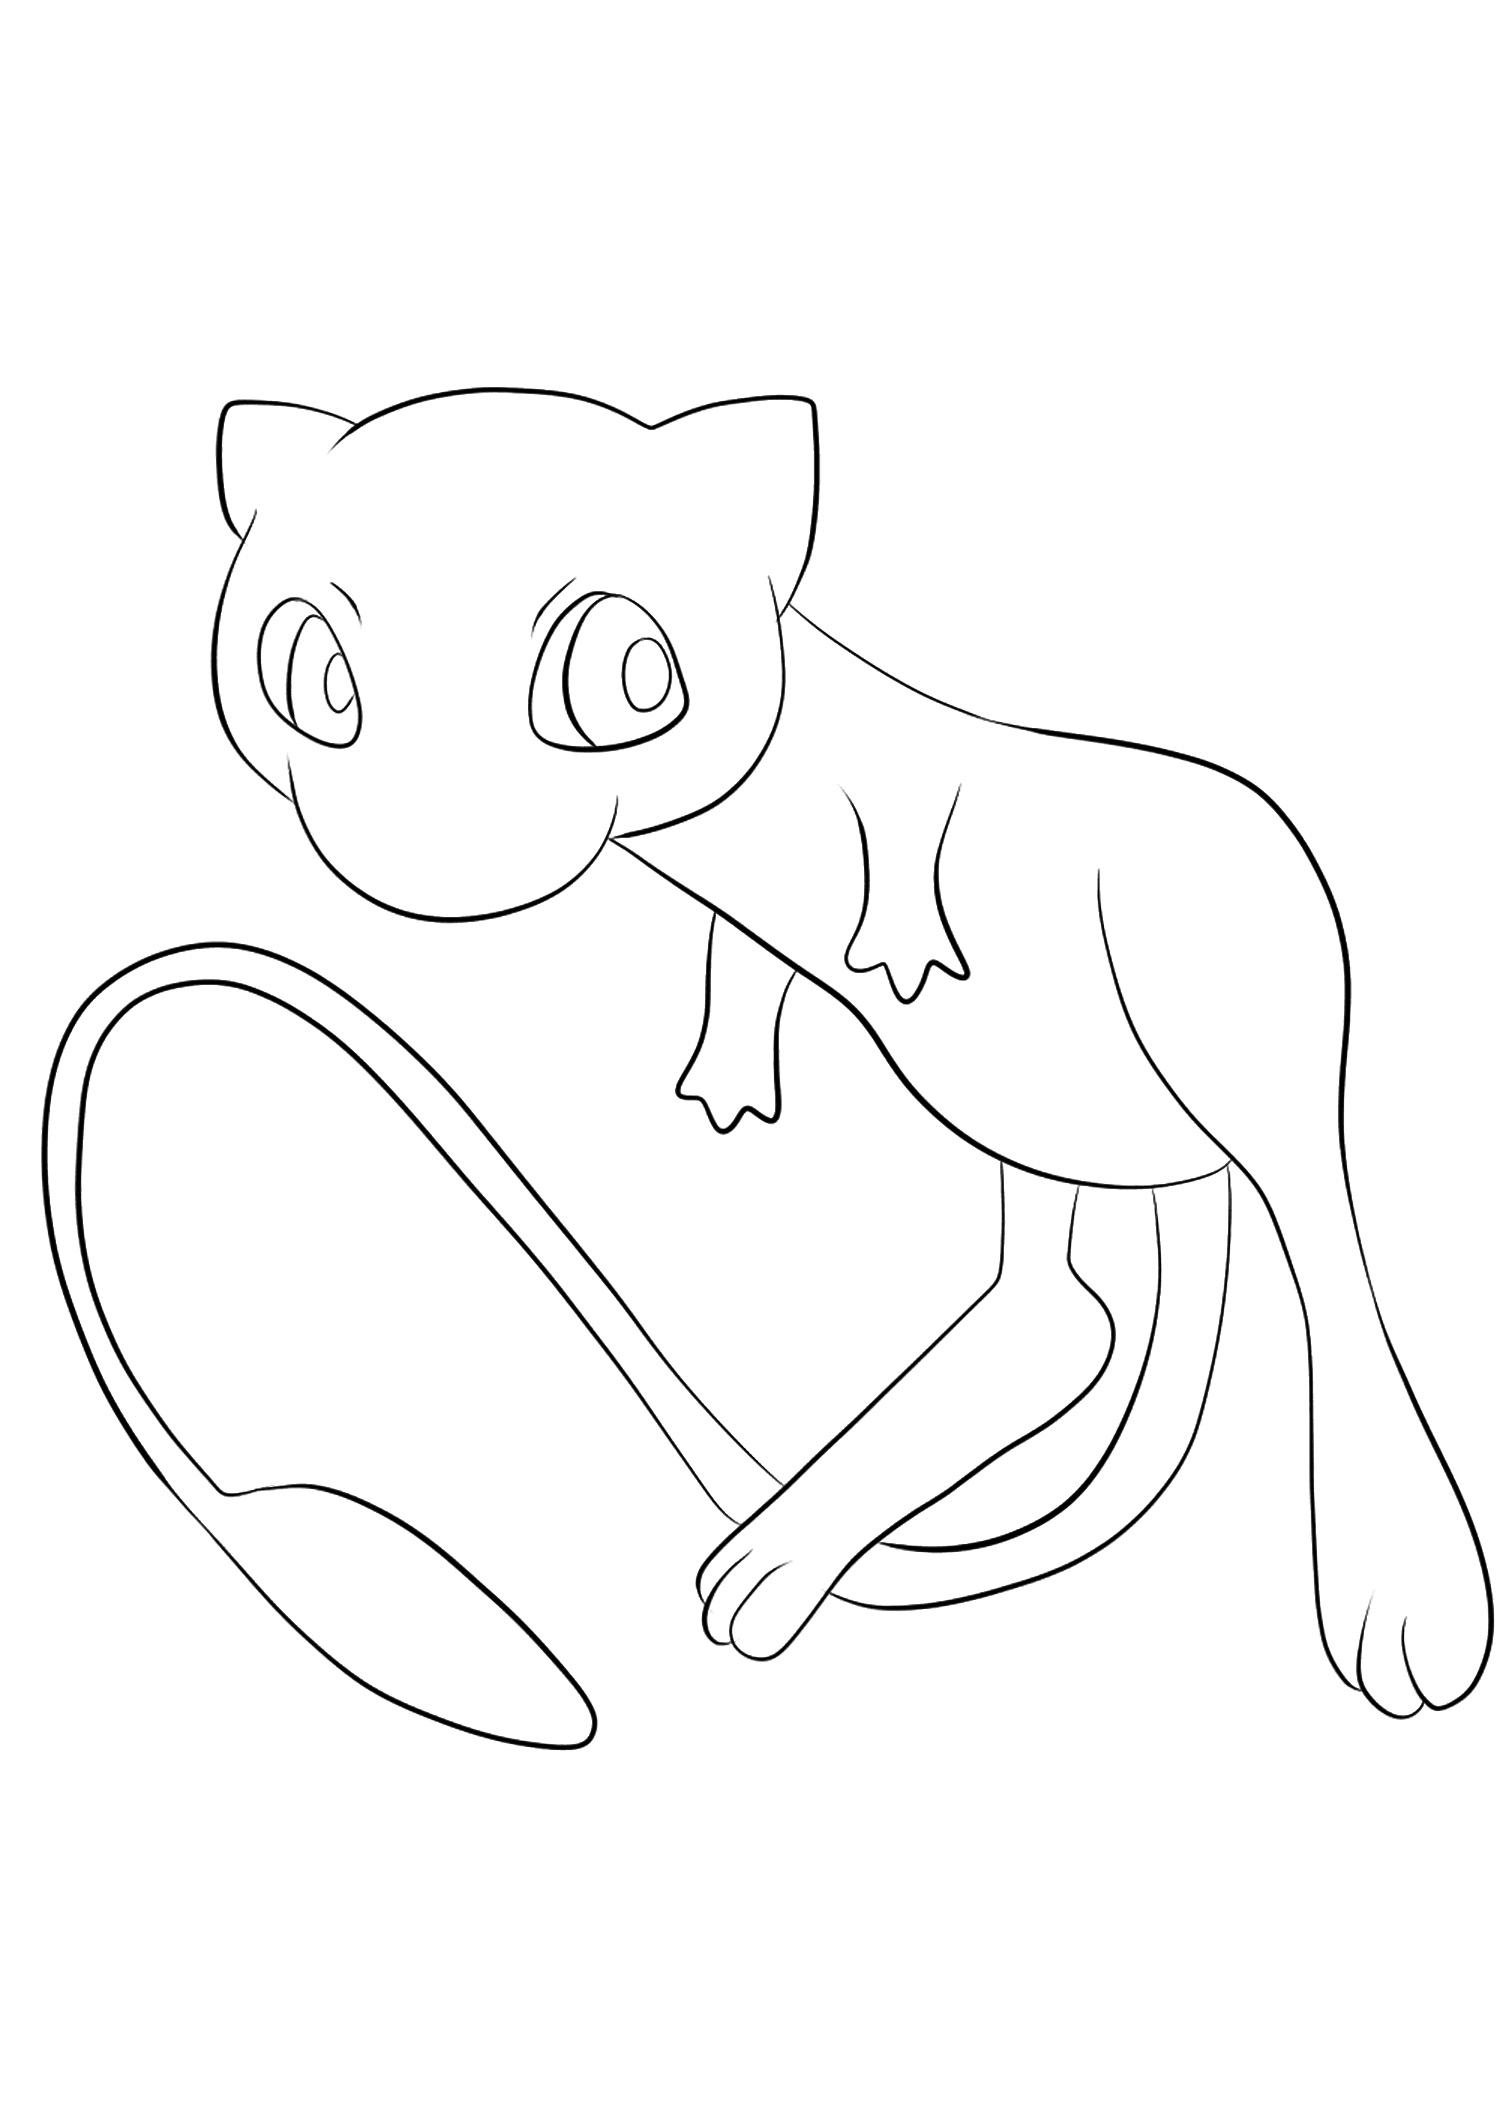 Mew (No.151). Mew Coloring page, Generation II Pokemon of type PsychicOriginal image credit: Pokemon linearts by Lilly Gerbil on Deviantart.Permission:  All rights reserved © Pokemon company and Ken Sugimori.